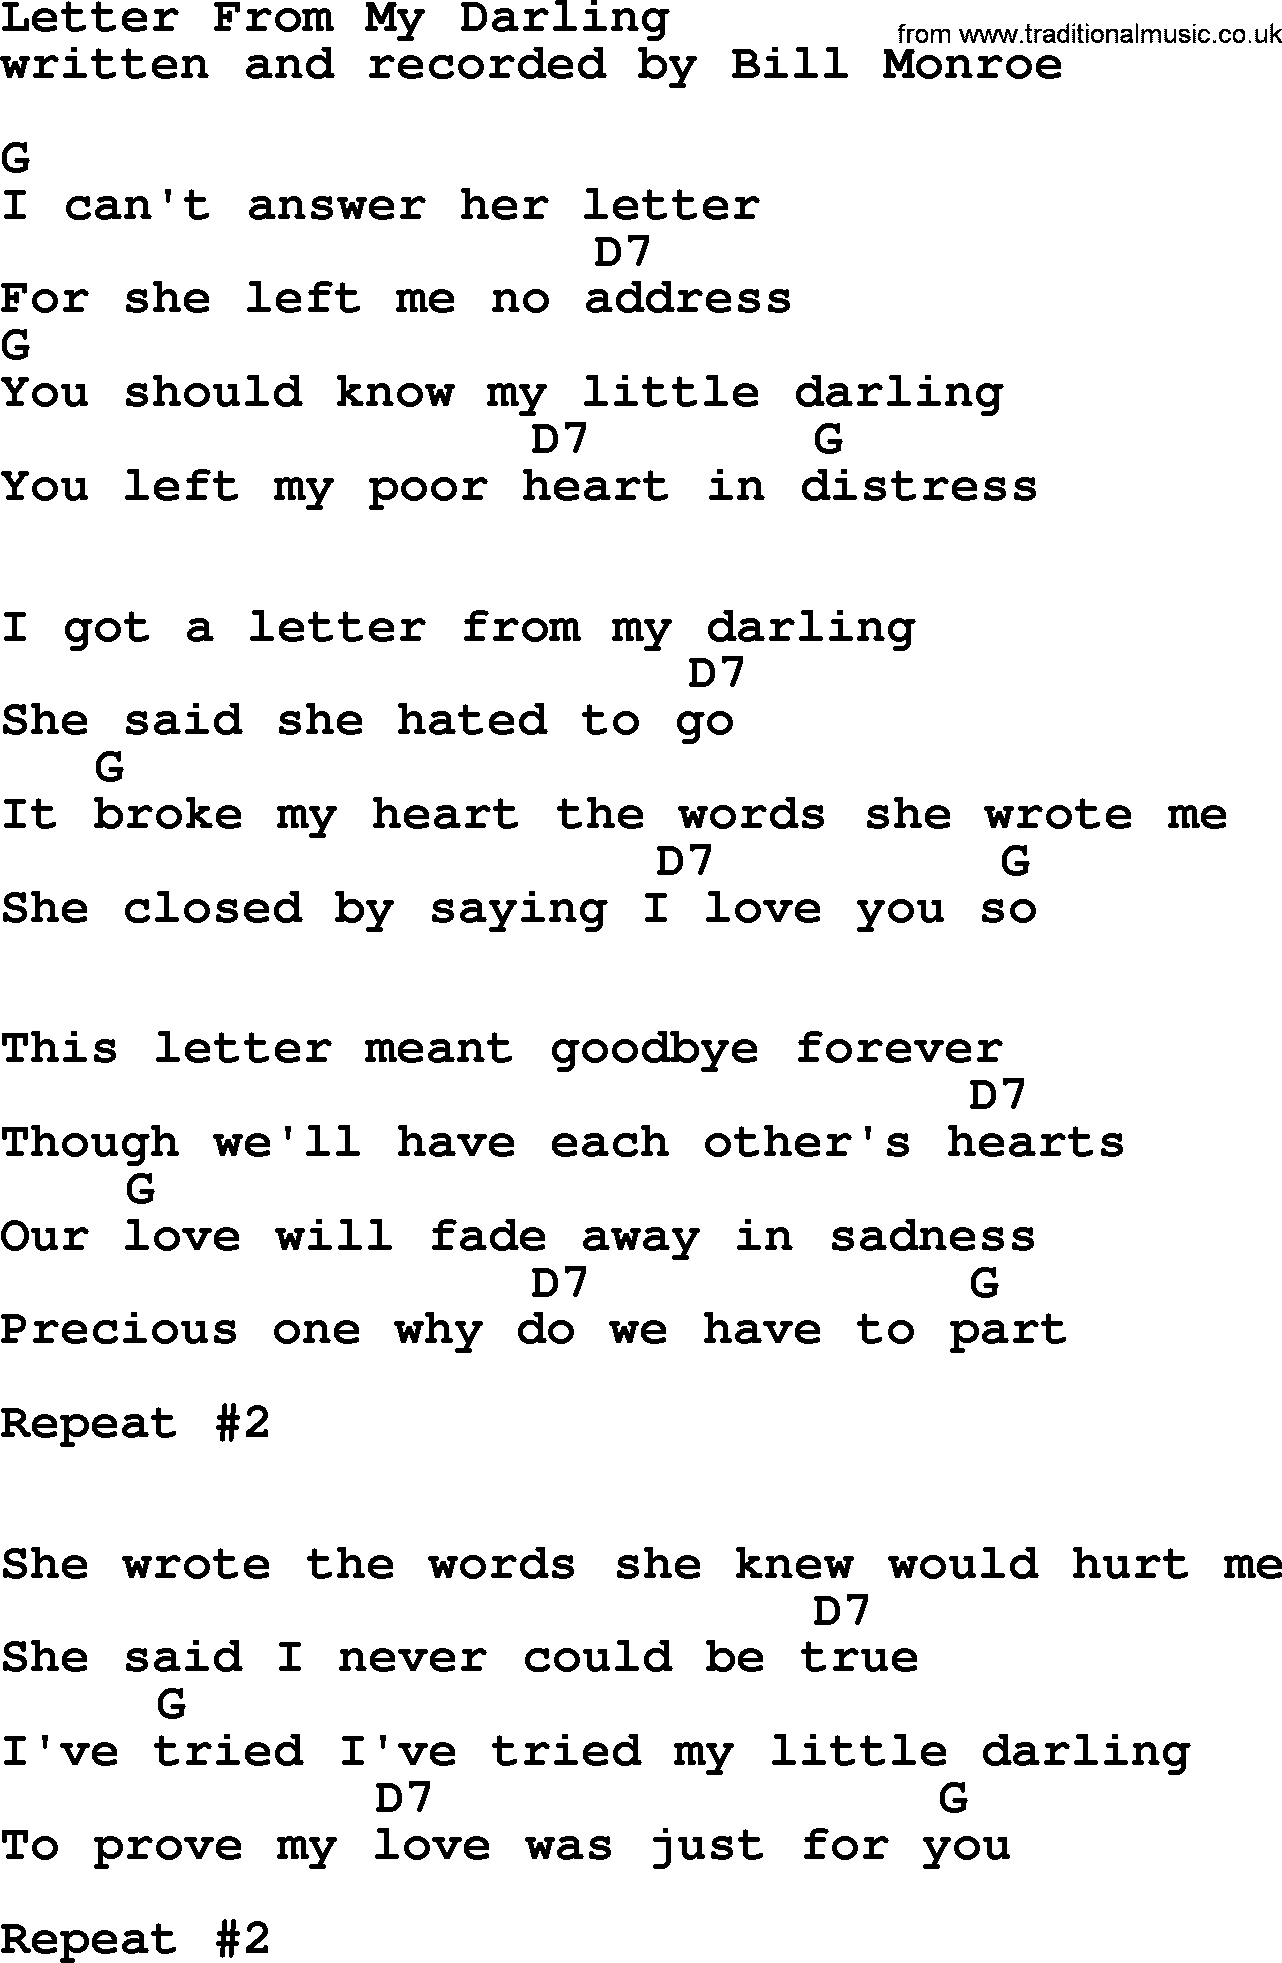 Bluegrass song: Letter From My Darling 1, lyrics and chords